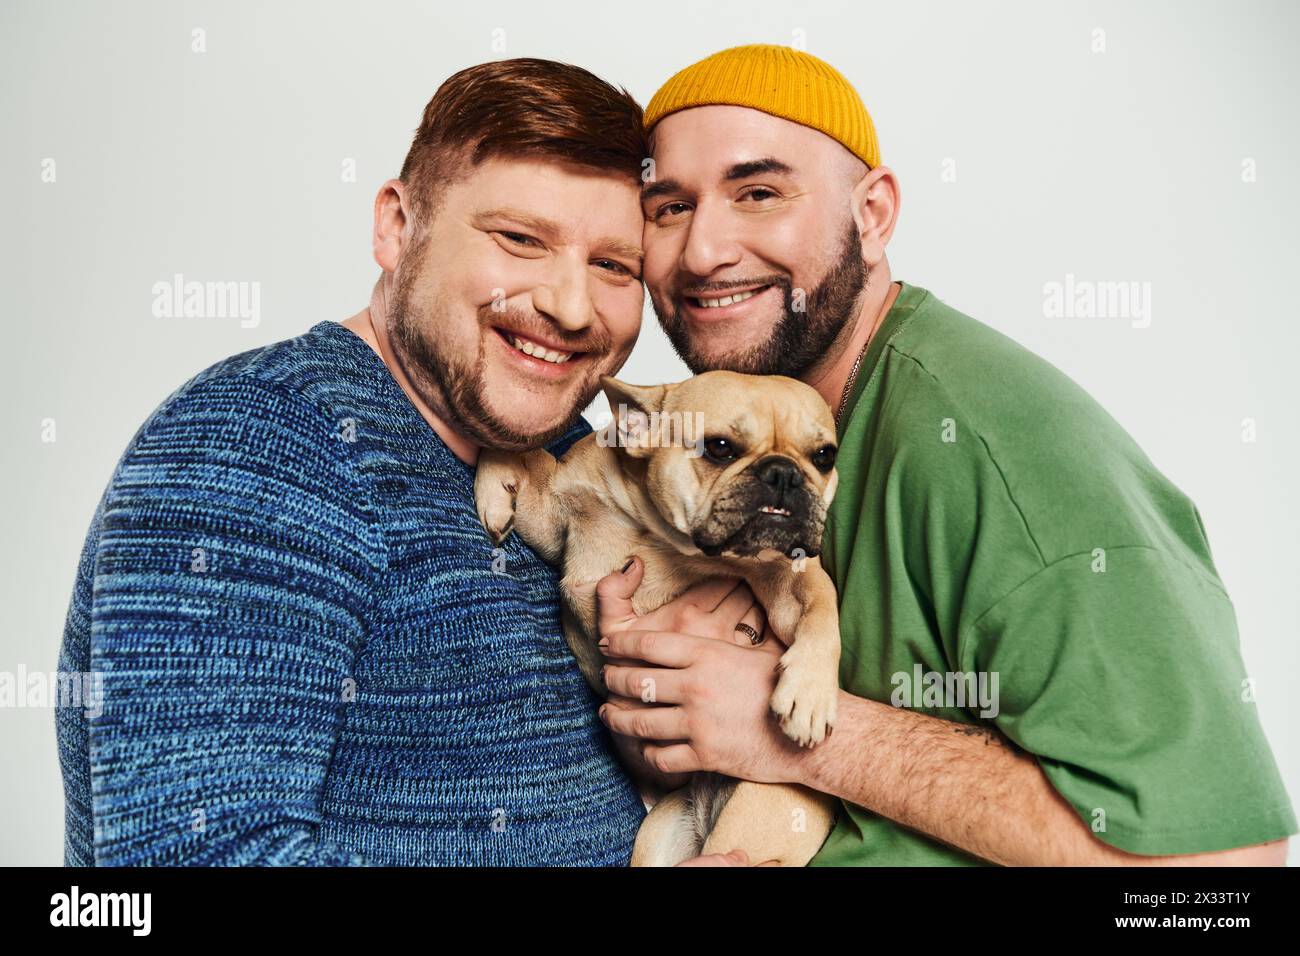 Two men hug tenderly, holding a small dog together. Stock Photo